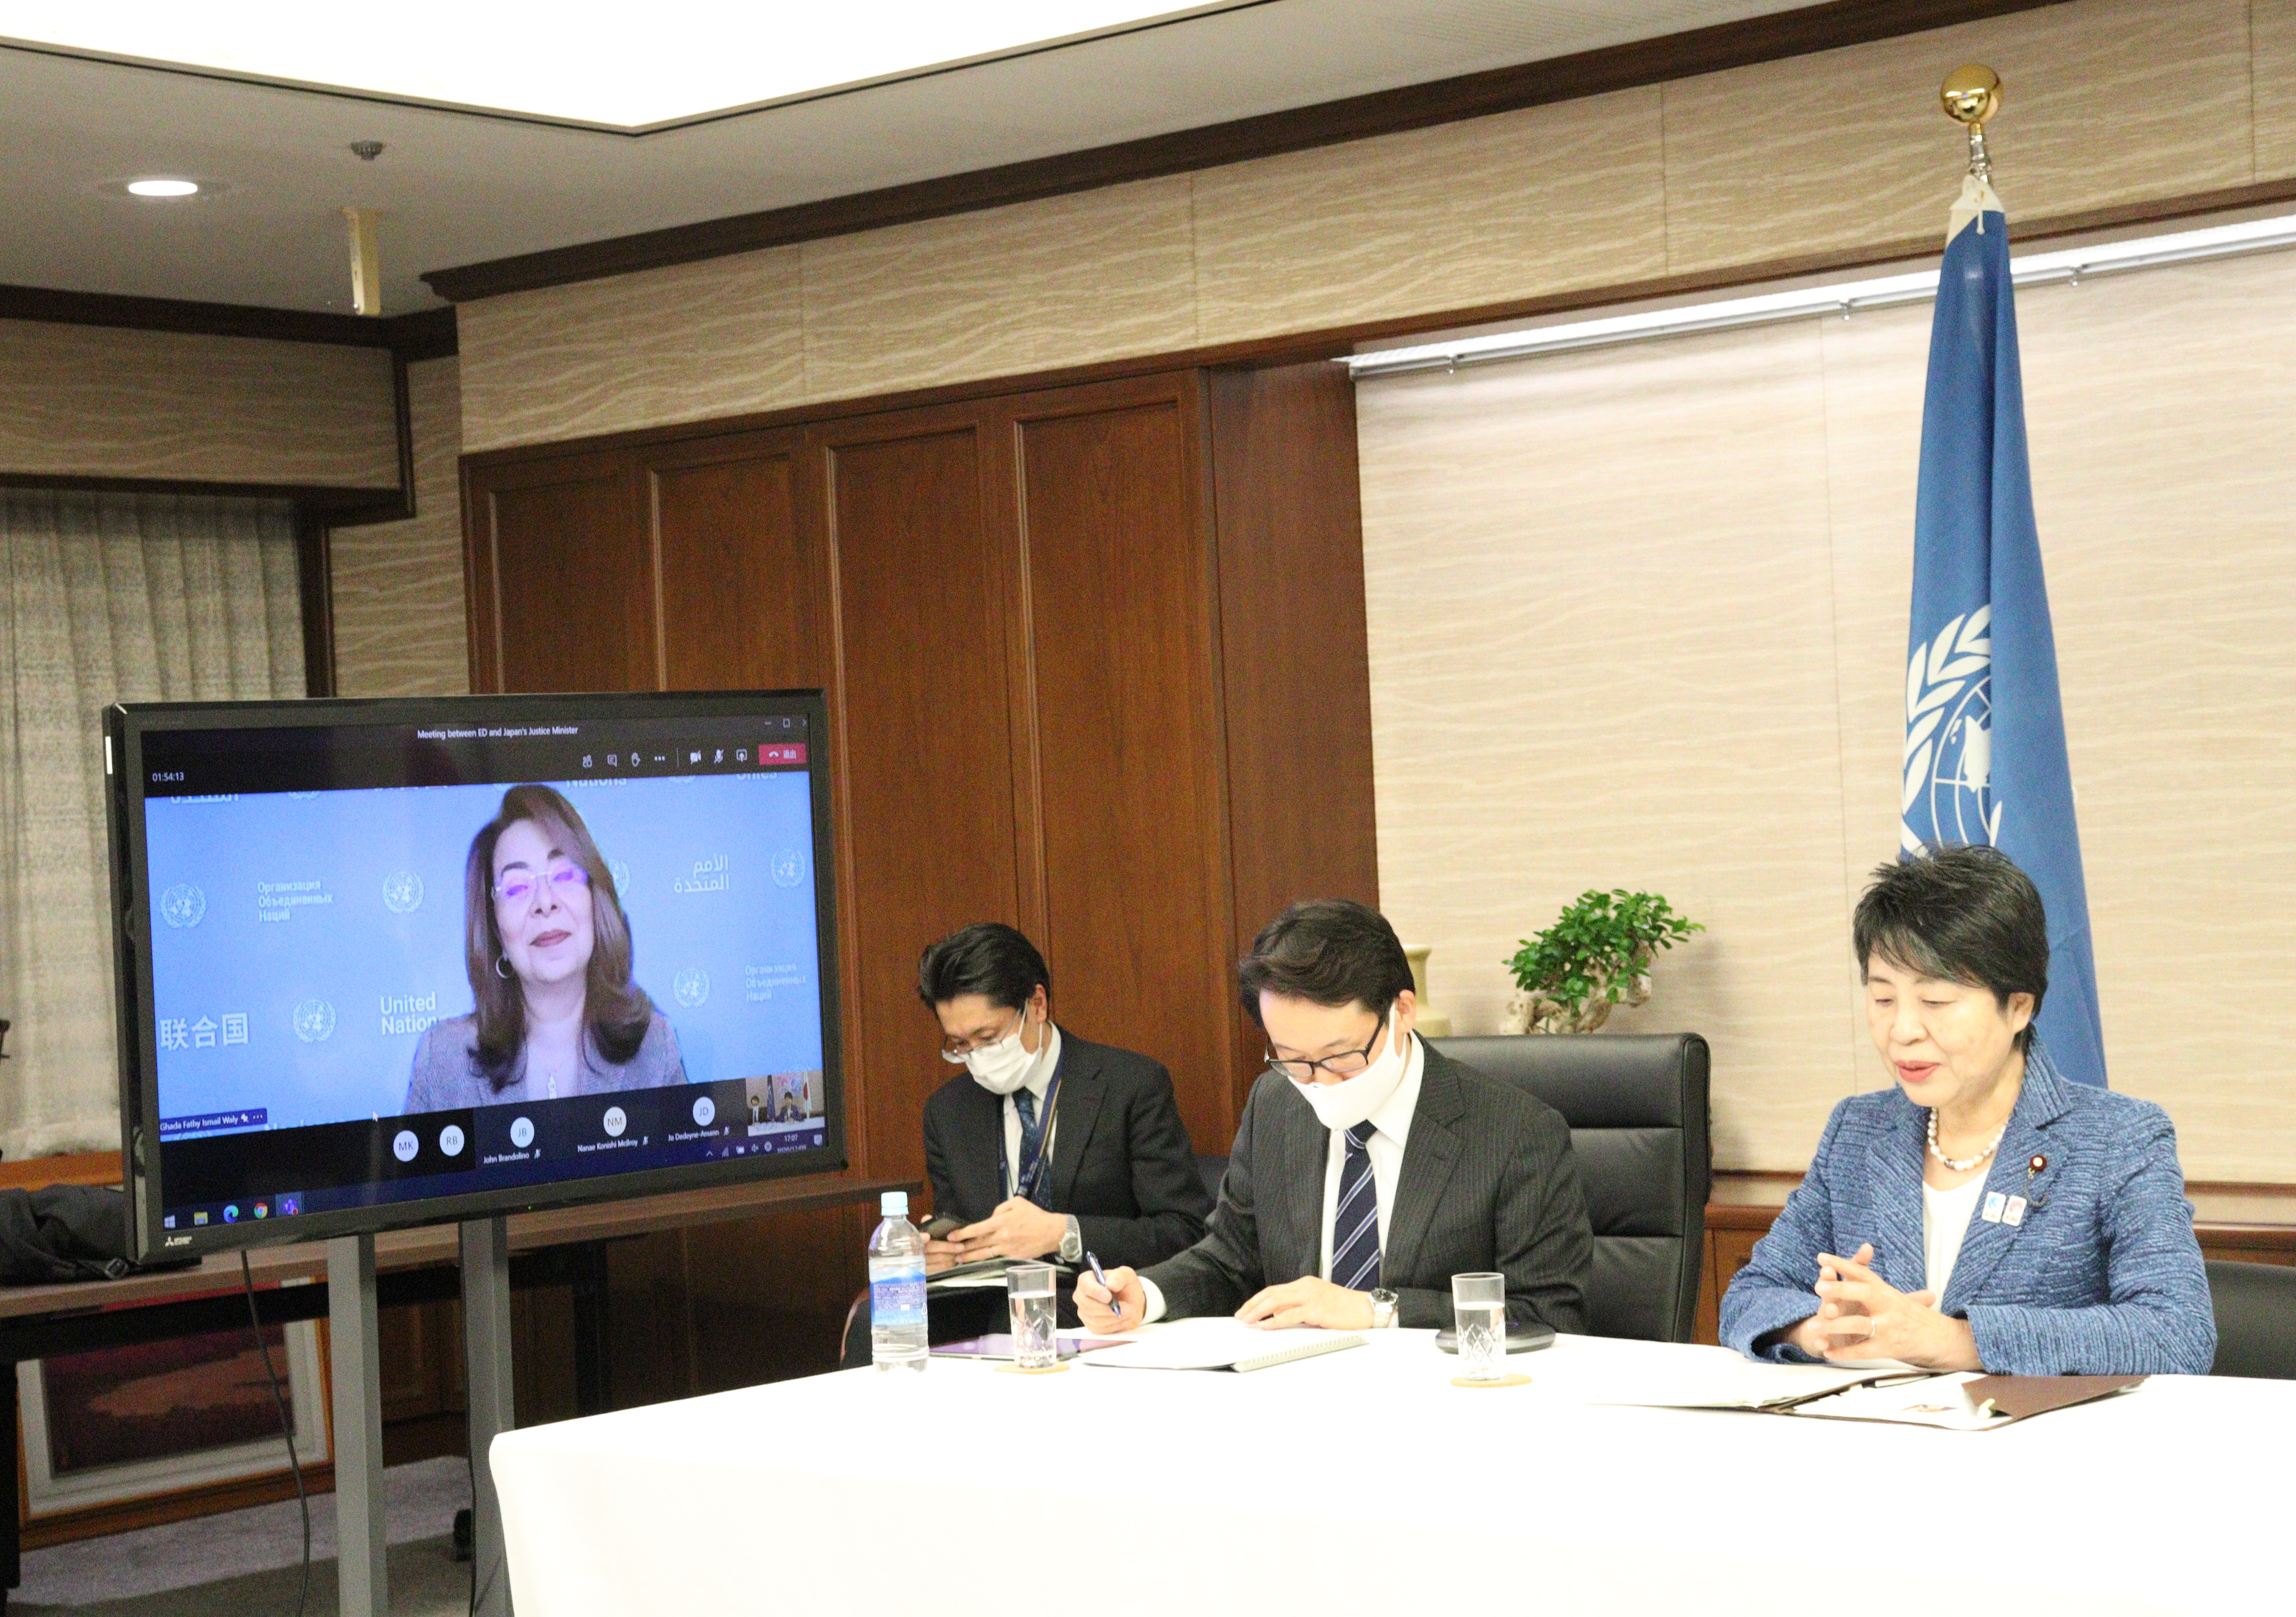 December 9, 2020 Justice Minister held web conference with the Executive Director of UNODC.